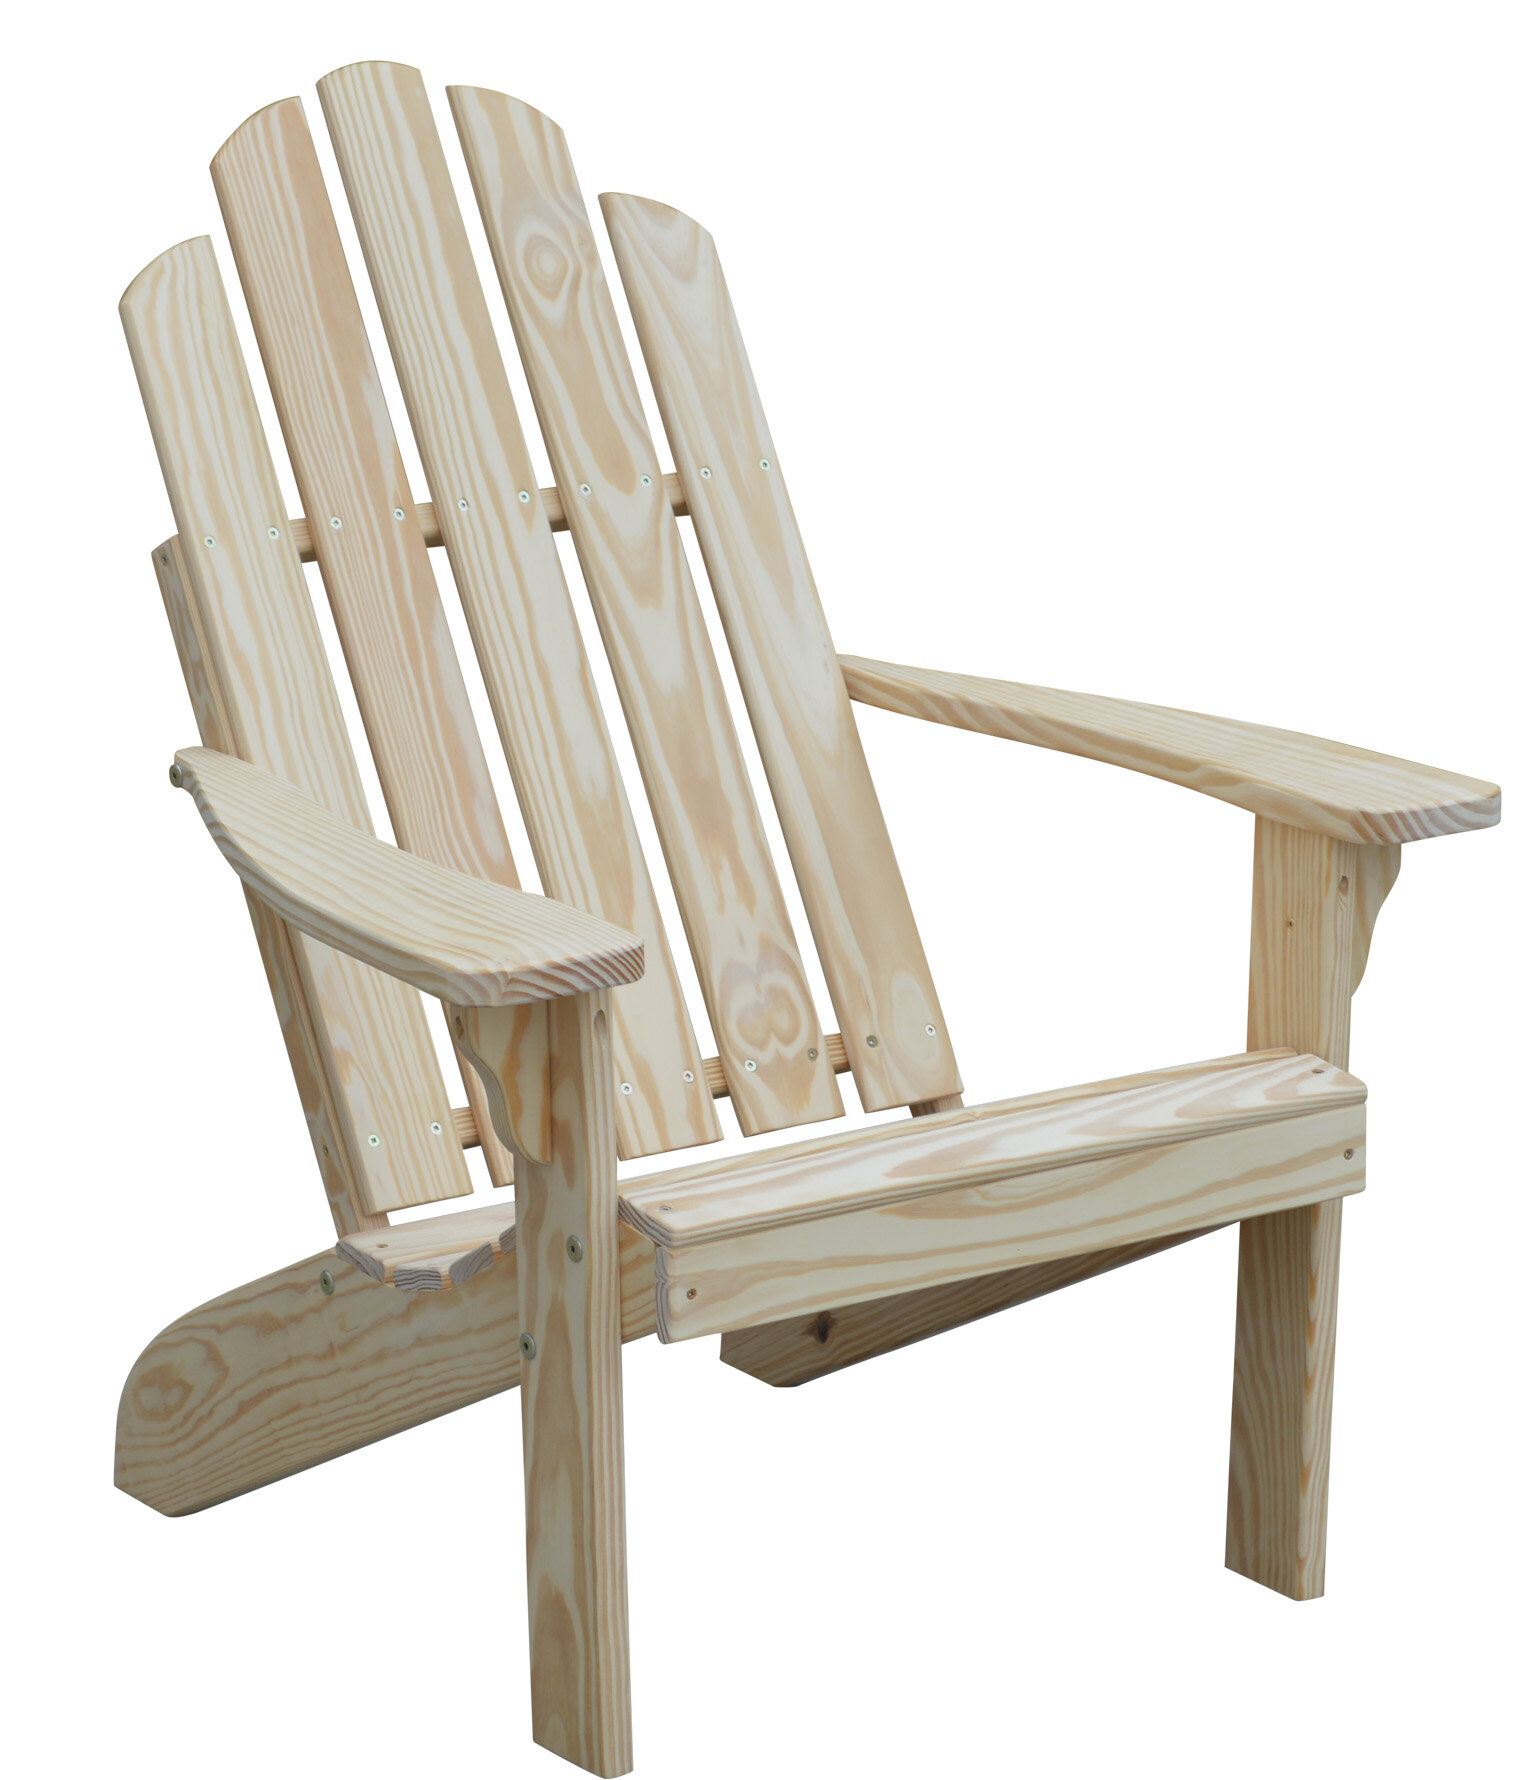 Where To Buy Wooden Adirondack Chairs  - When It Comes To Payment Options, Flipkart Now Has A Debit Card Emi Option That You Can Opt For.